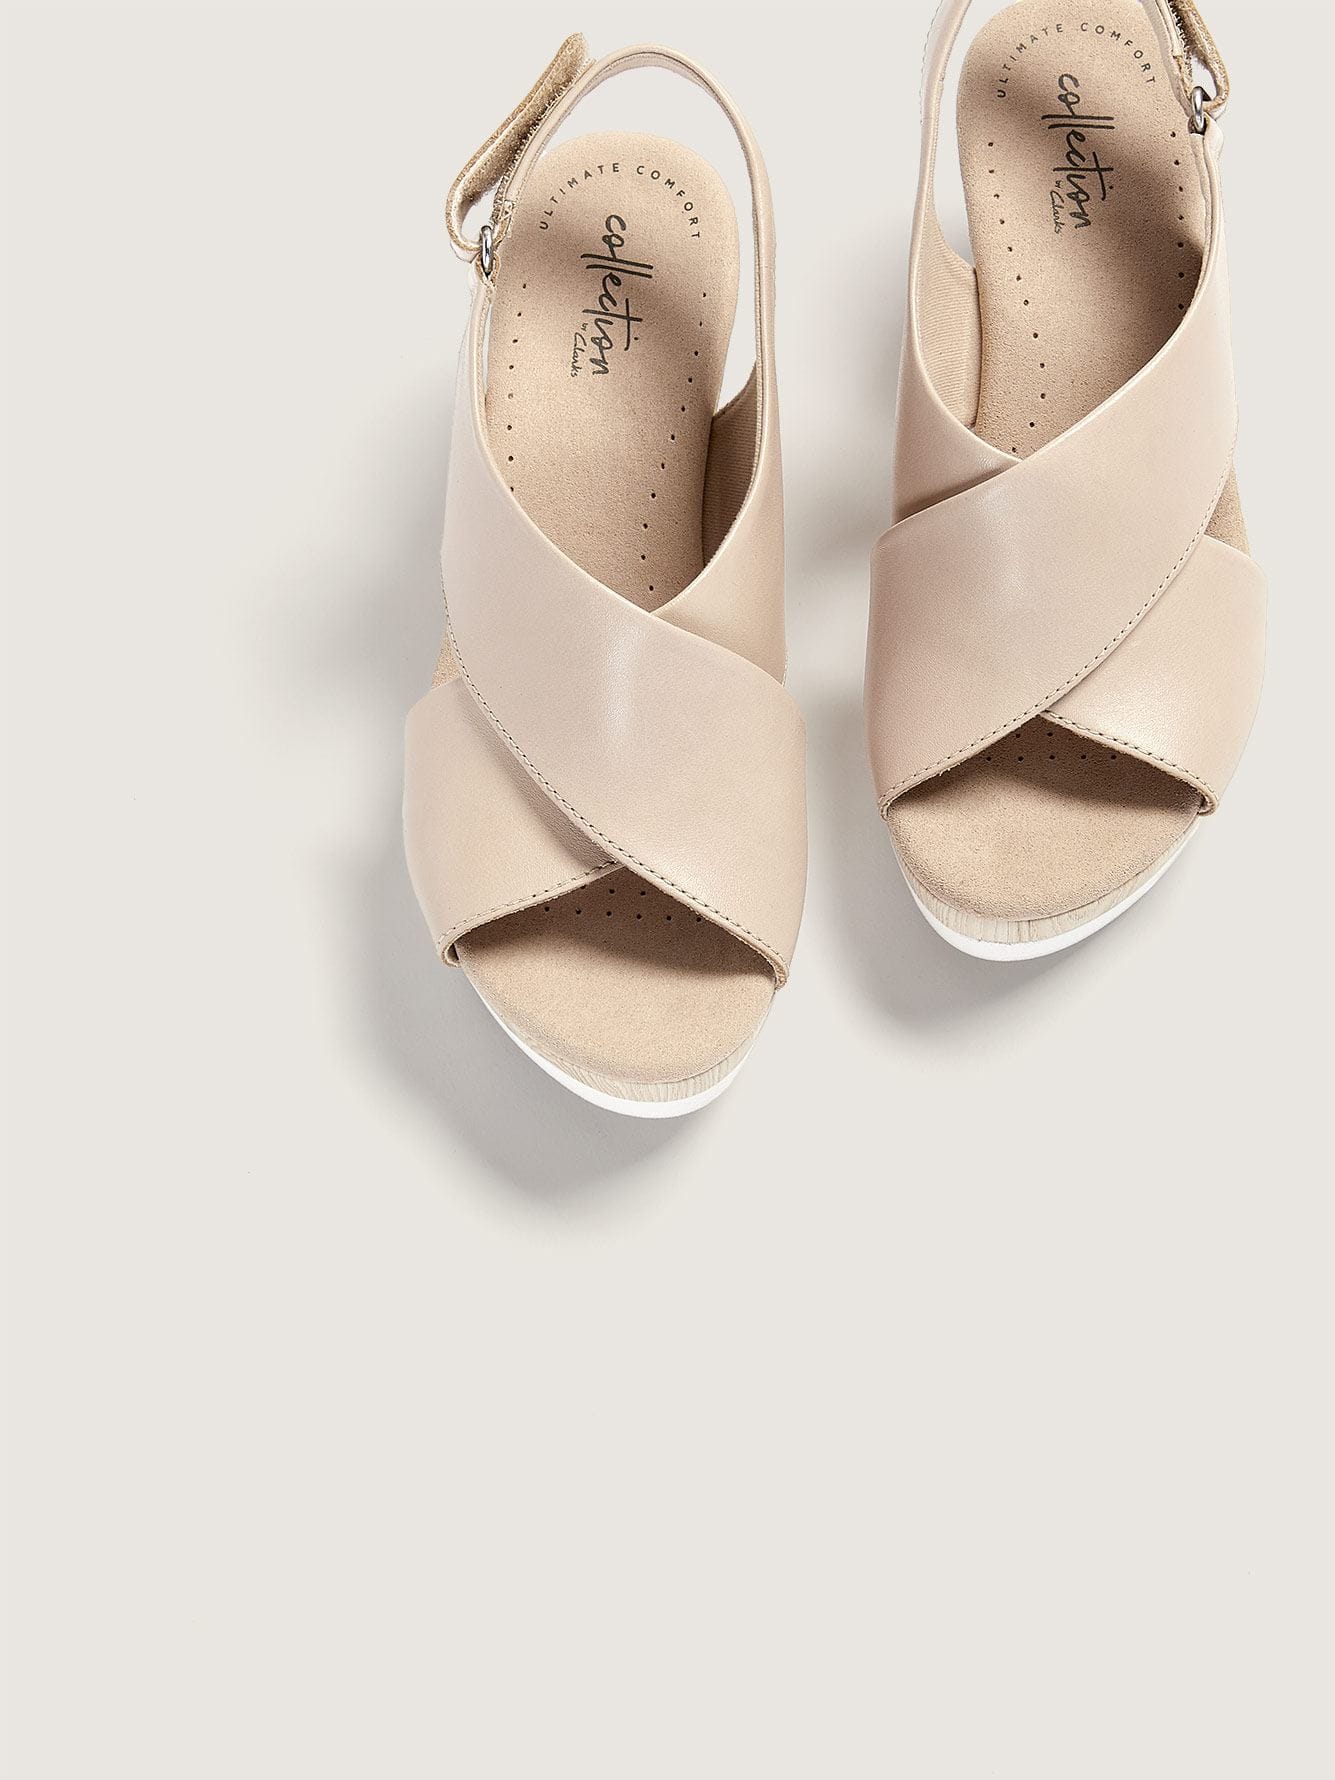 Wide Wedge Cammy Pearl Sandals - Clarks 